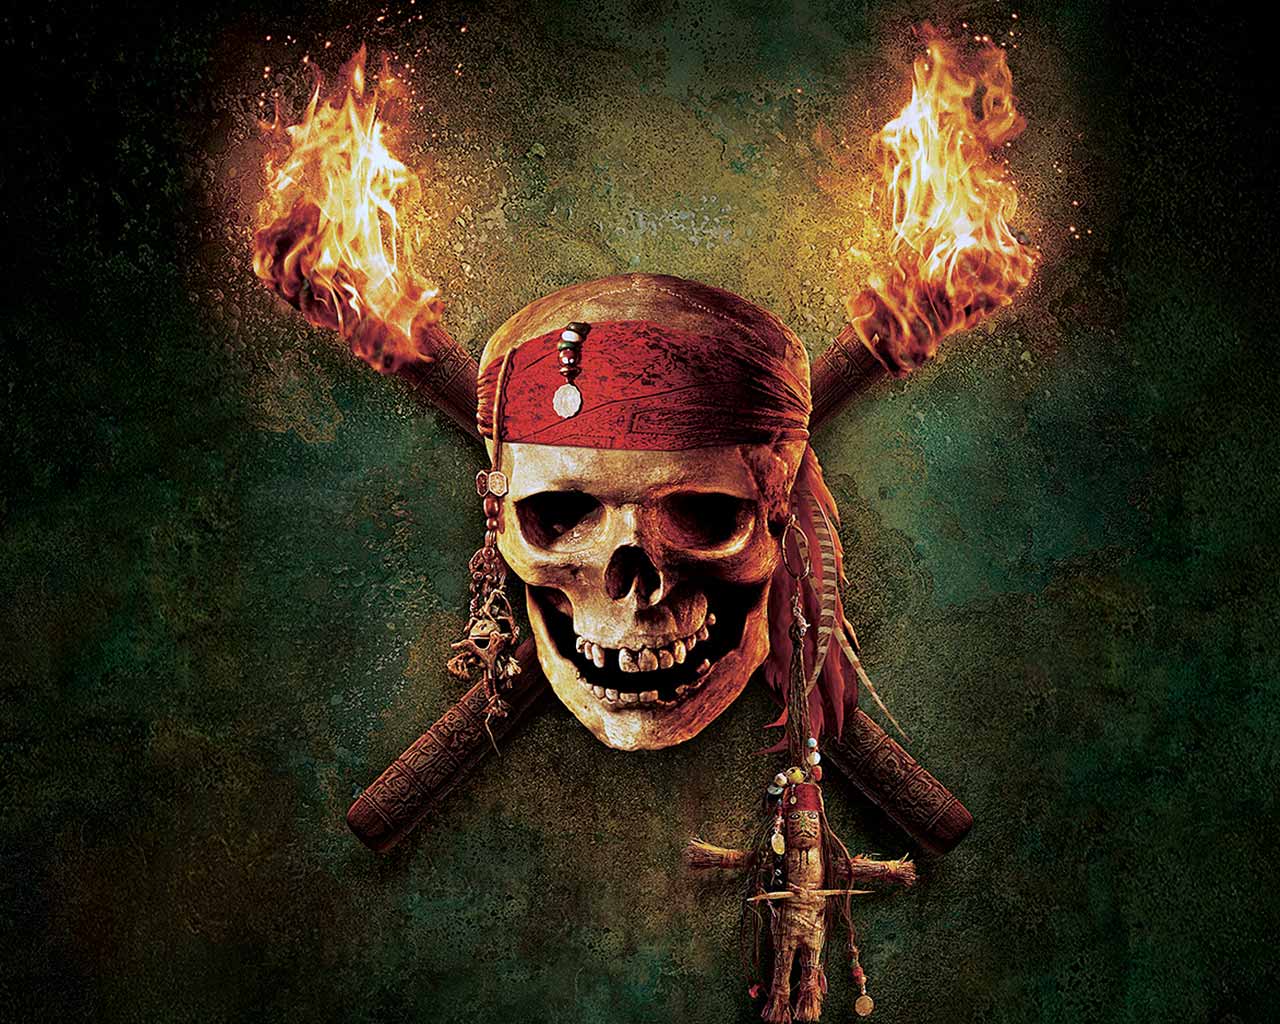 Pirates Of The Caribbean wallpaper - Wallpapers - Movie extras ...